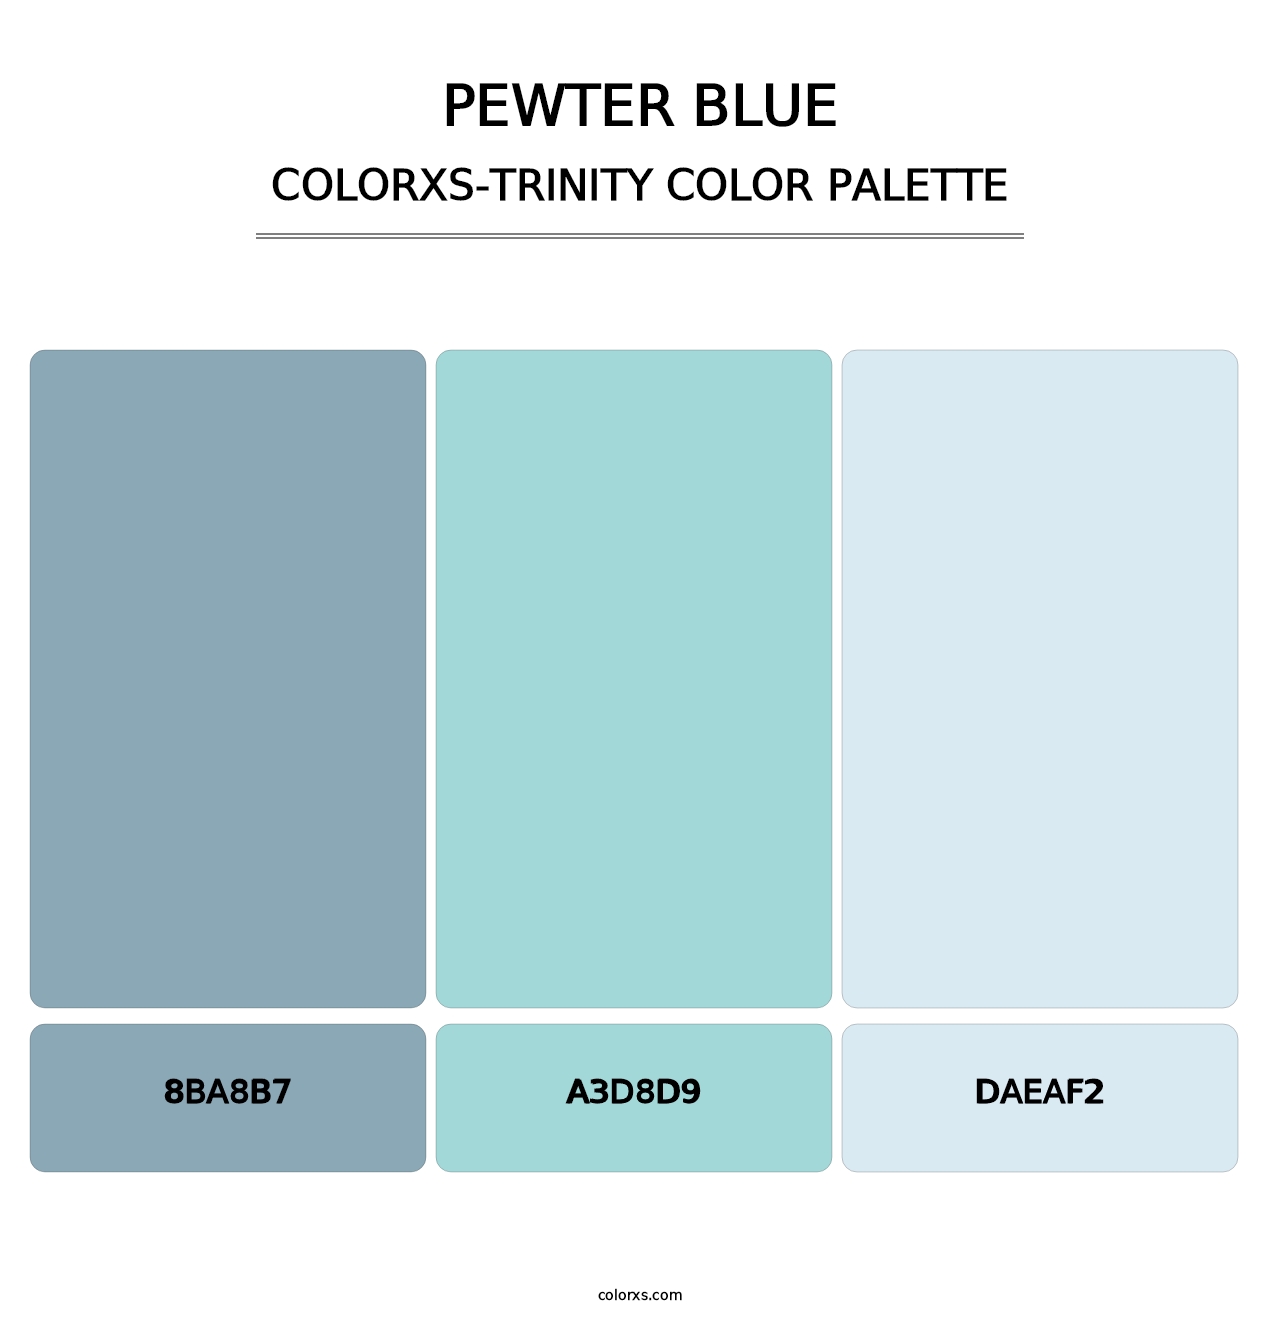 Pewter Blue - Colorxs Trinity Palette